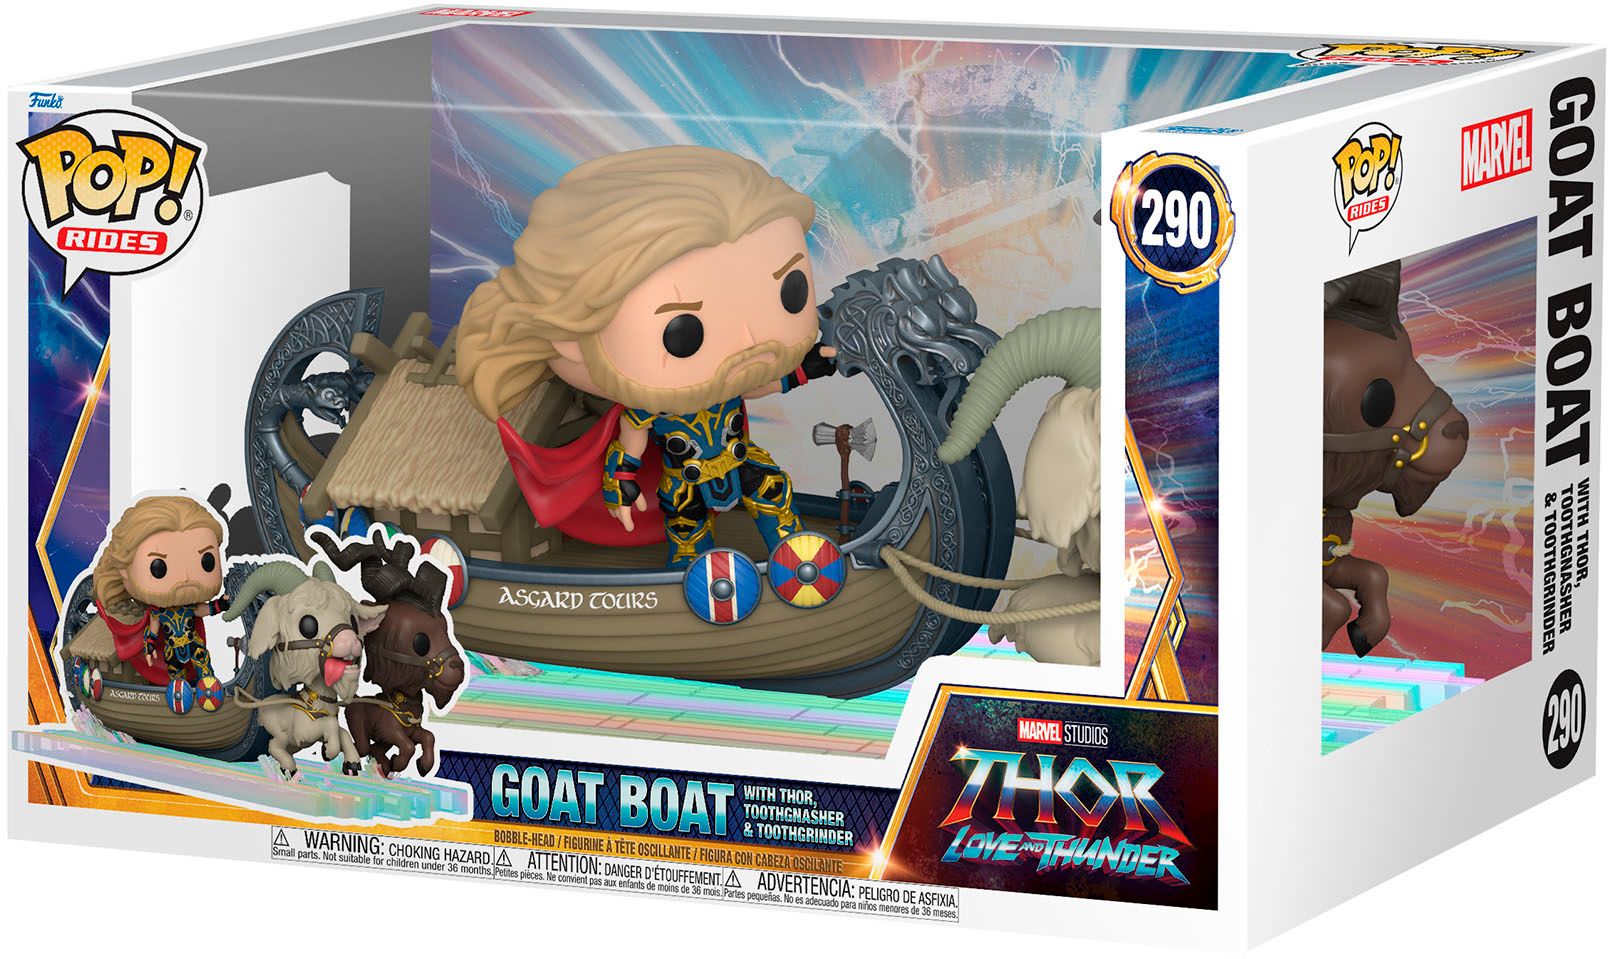 Thor's Goat Boat super deluxe